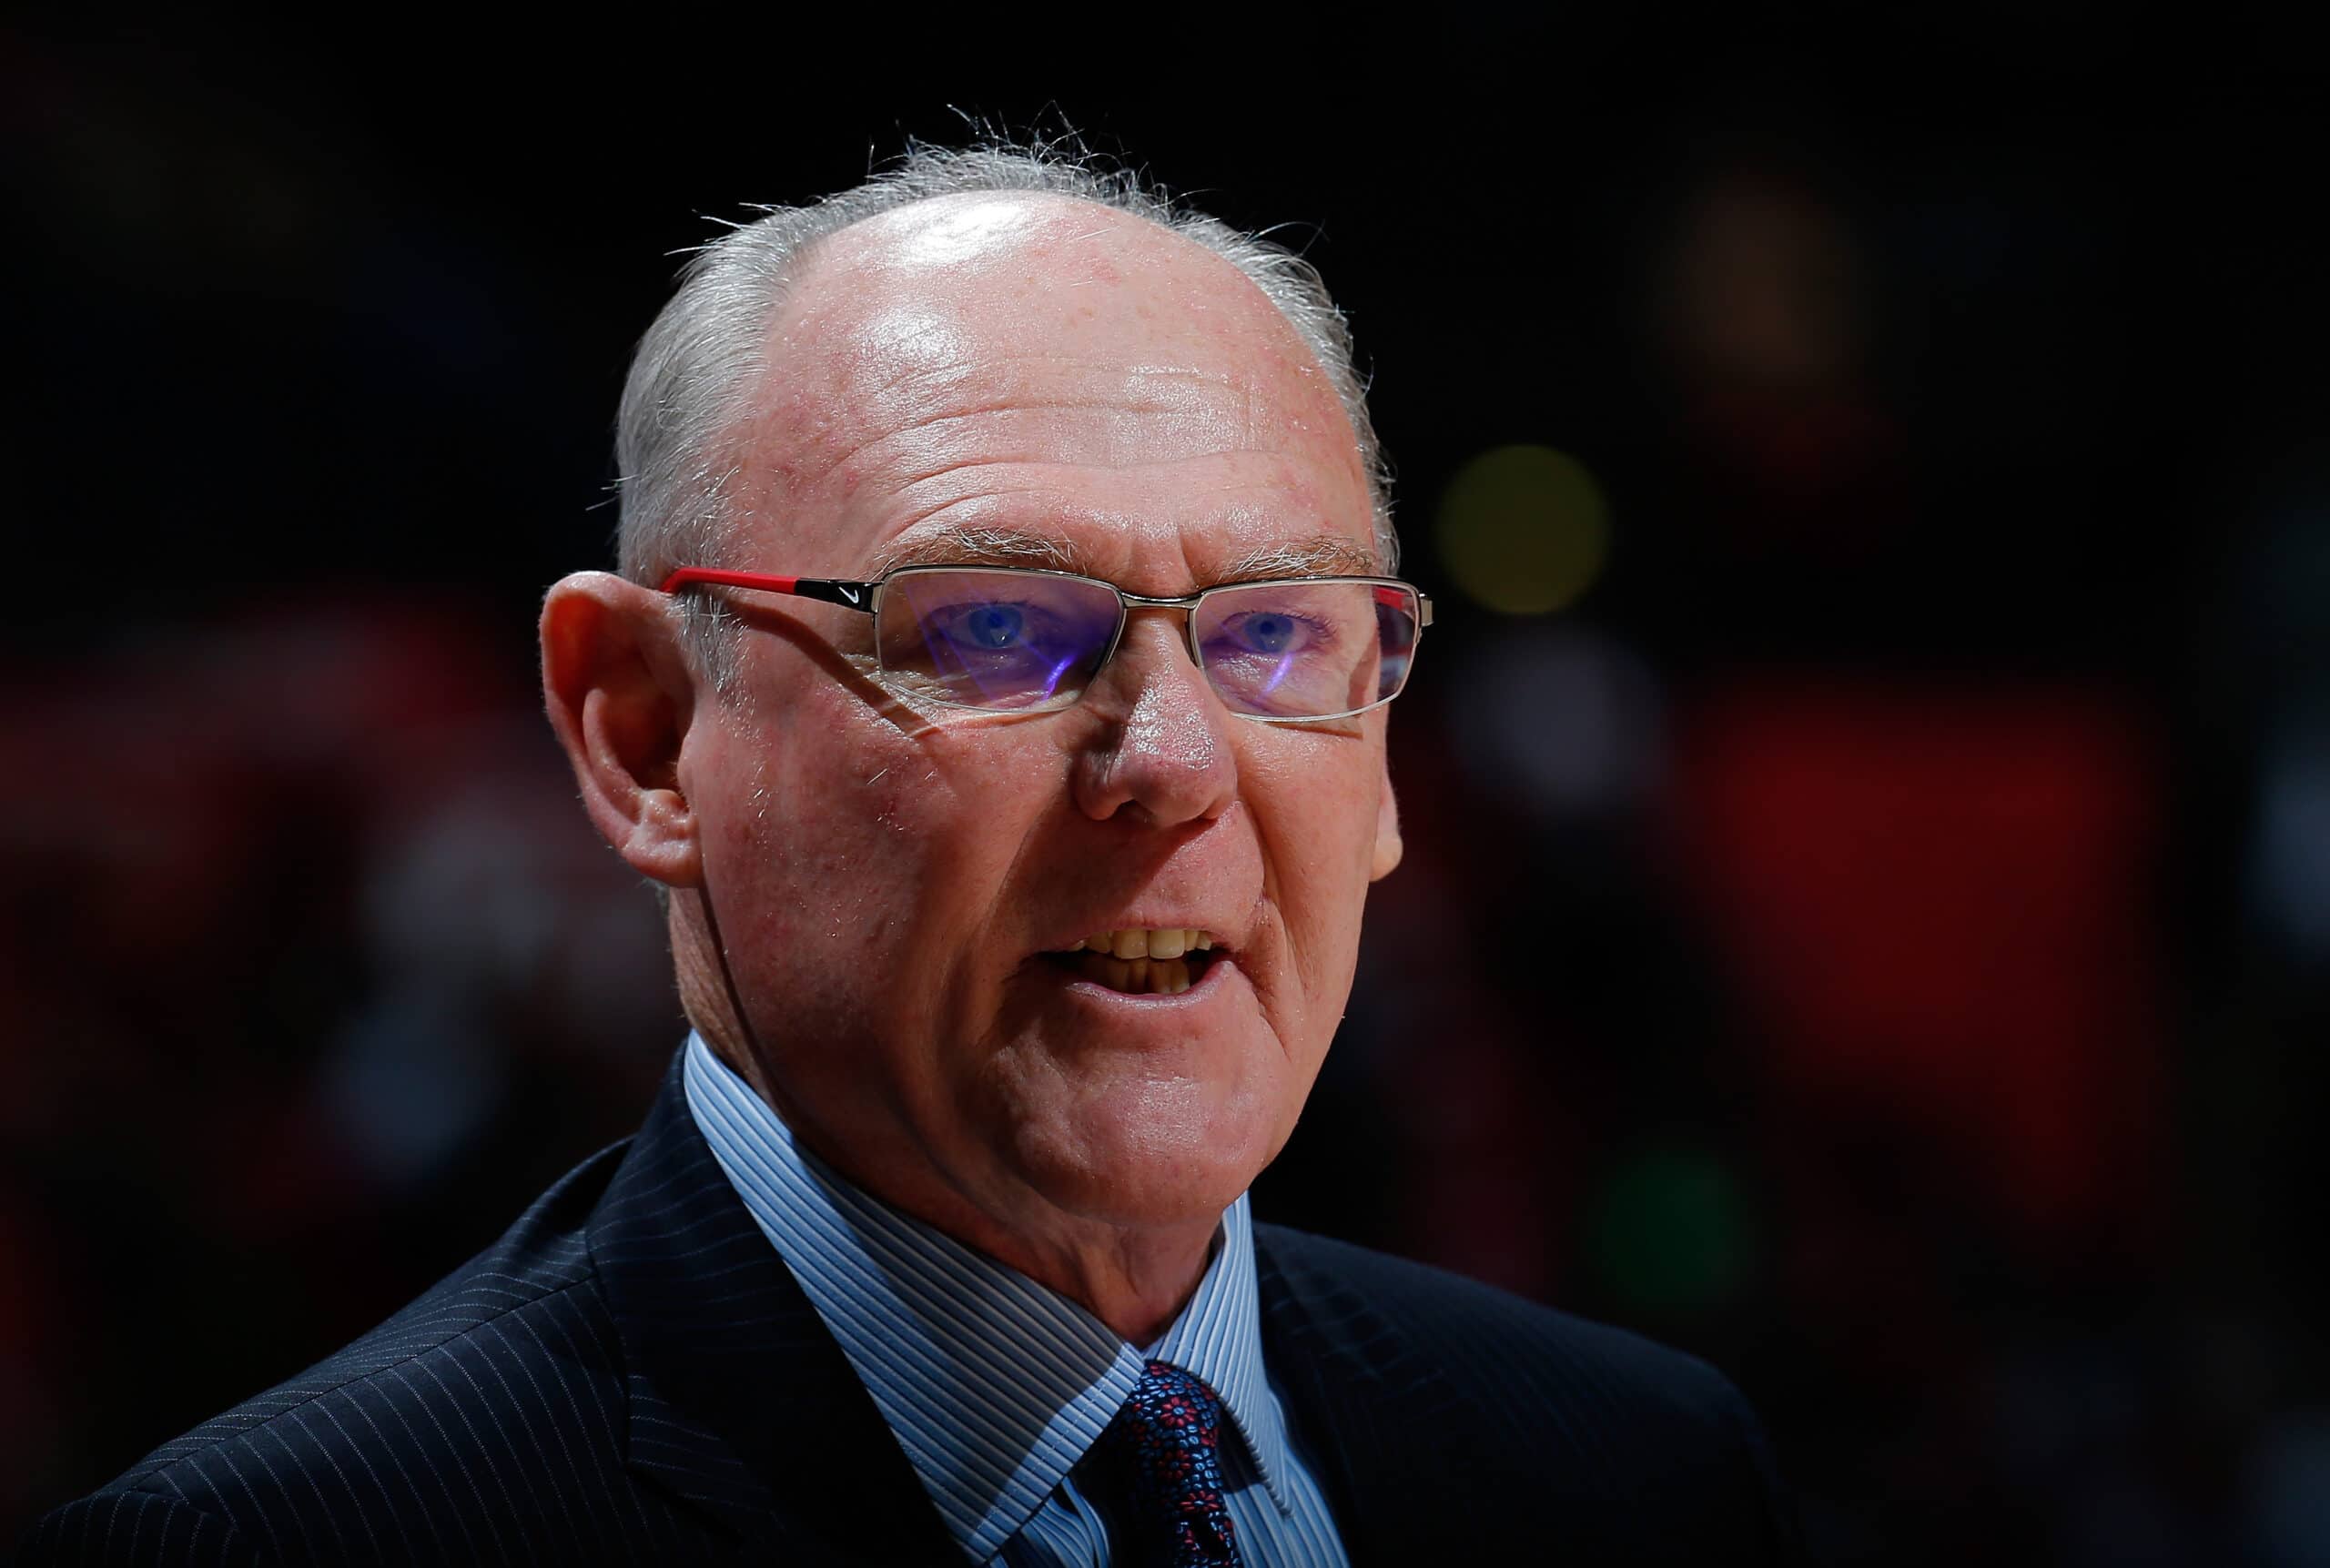 Seattle SuperSonics Return Likely as NBA Eyes Expansion, Says Former Coach George Karl